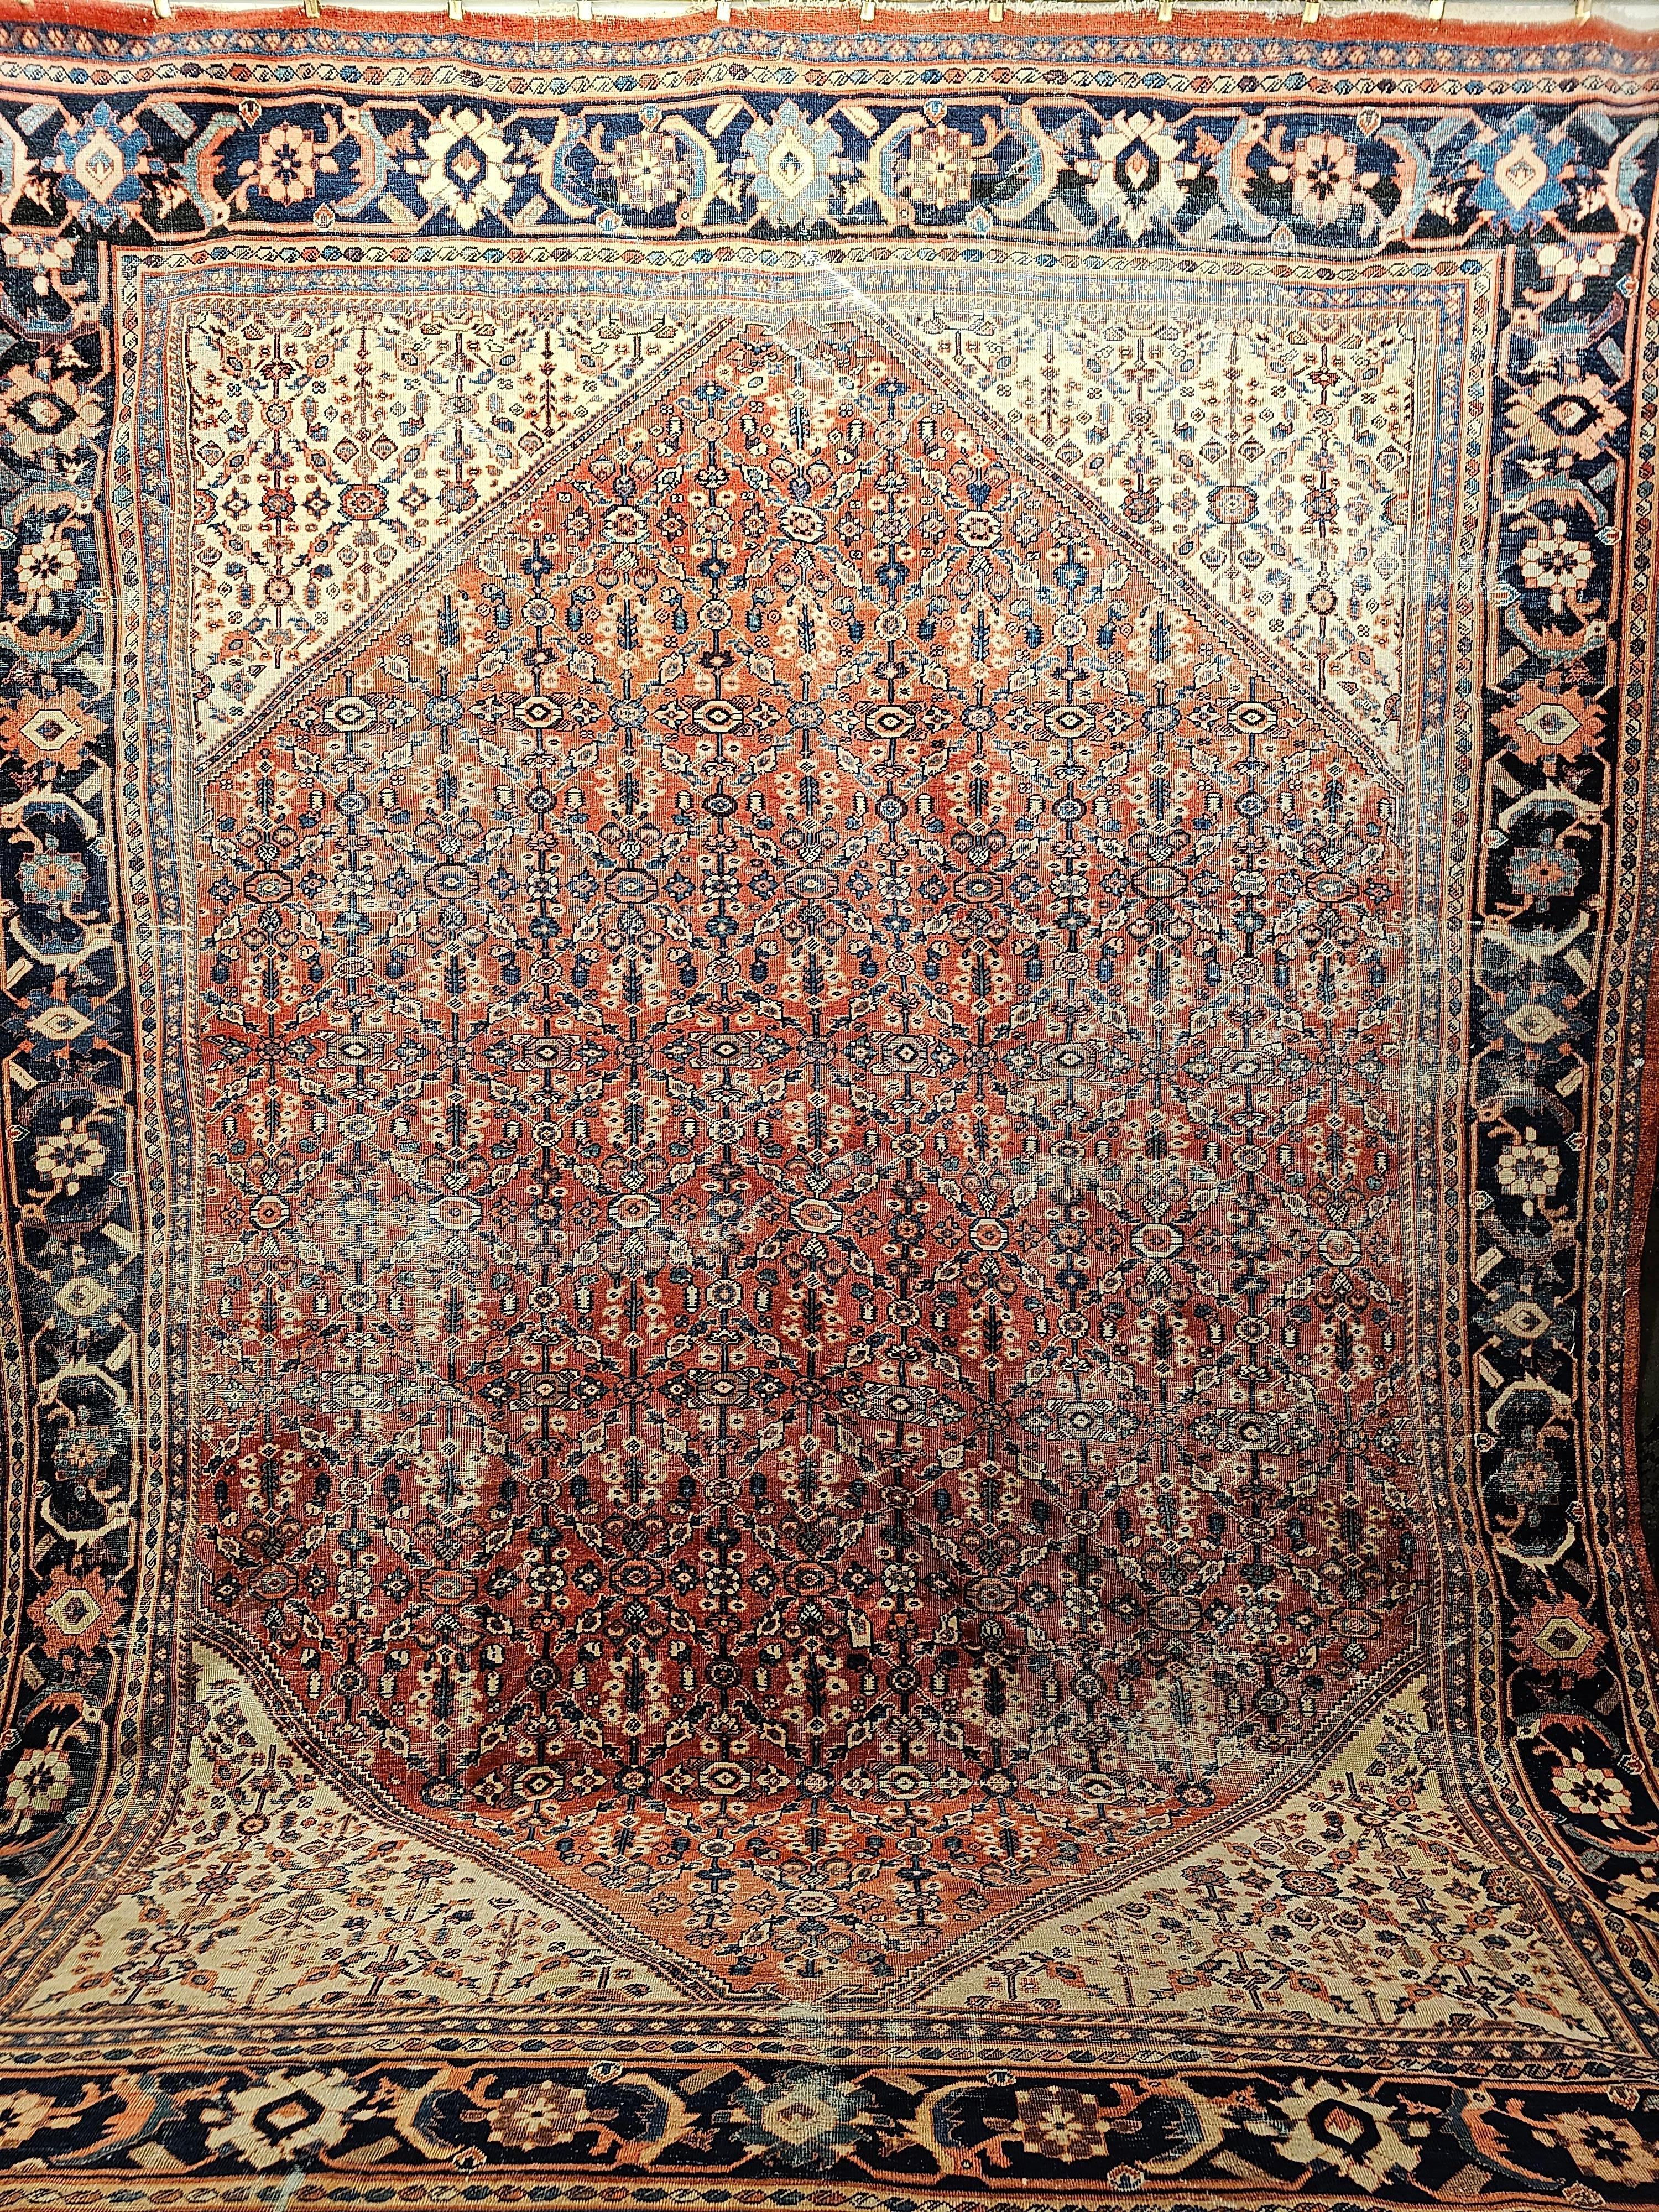 The Persian Mahal/Sultanabad room size carpet from the late 1800s comes in the very desirable all-over design pattern. The field is a brick red color with geometric designs throughout.  The corner spandrels are in ivory or pale yellow which adds to